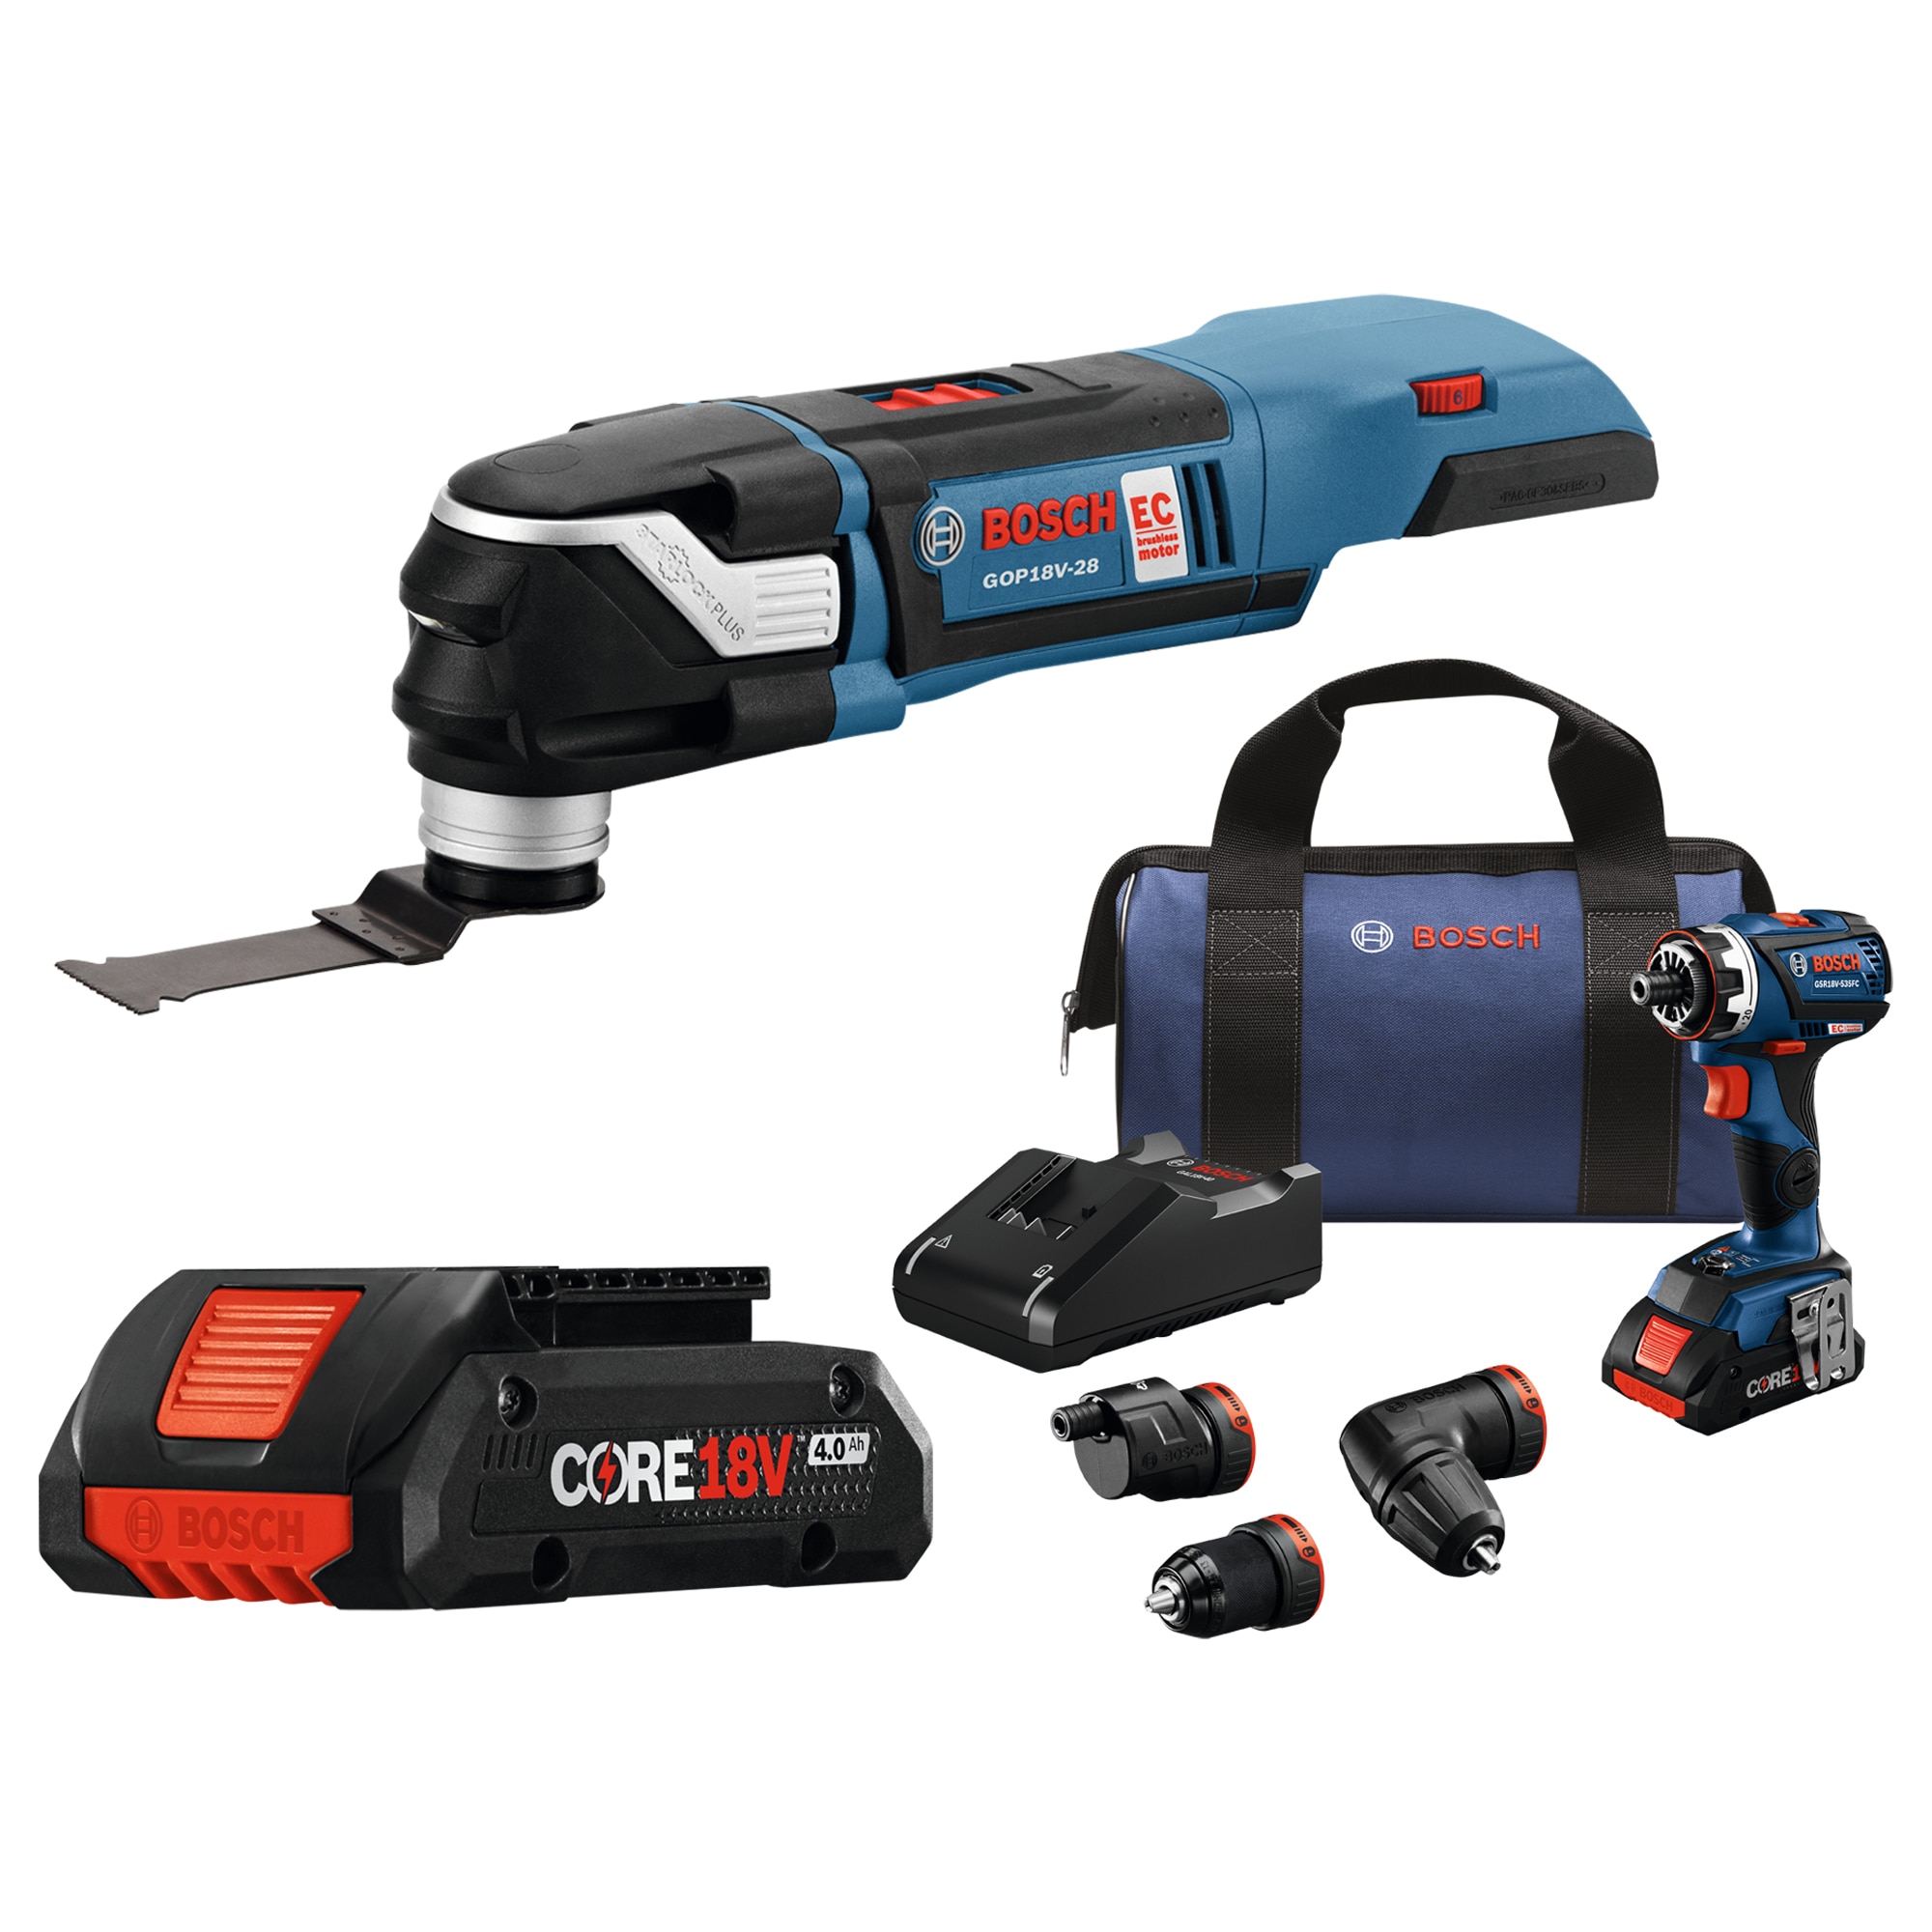 Bosch 18V Brushless 3-Tool Kit w/ Chameleon 5-in-1 Drill Driver/ Starlock Oscillating Tool/ 2x4.0ah Batteries, Charger and Bag